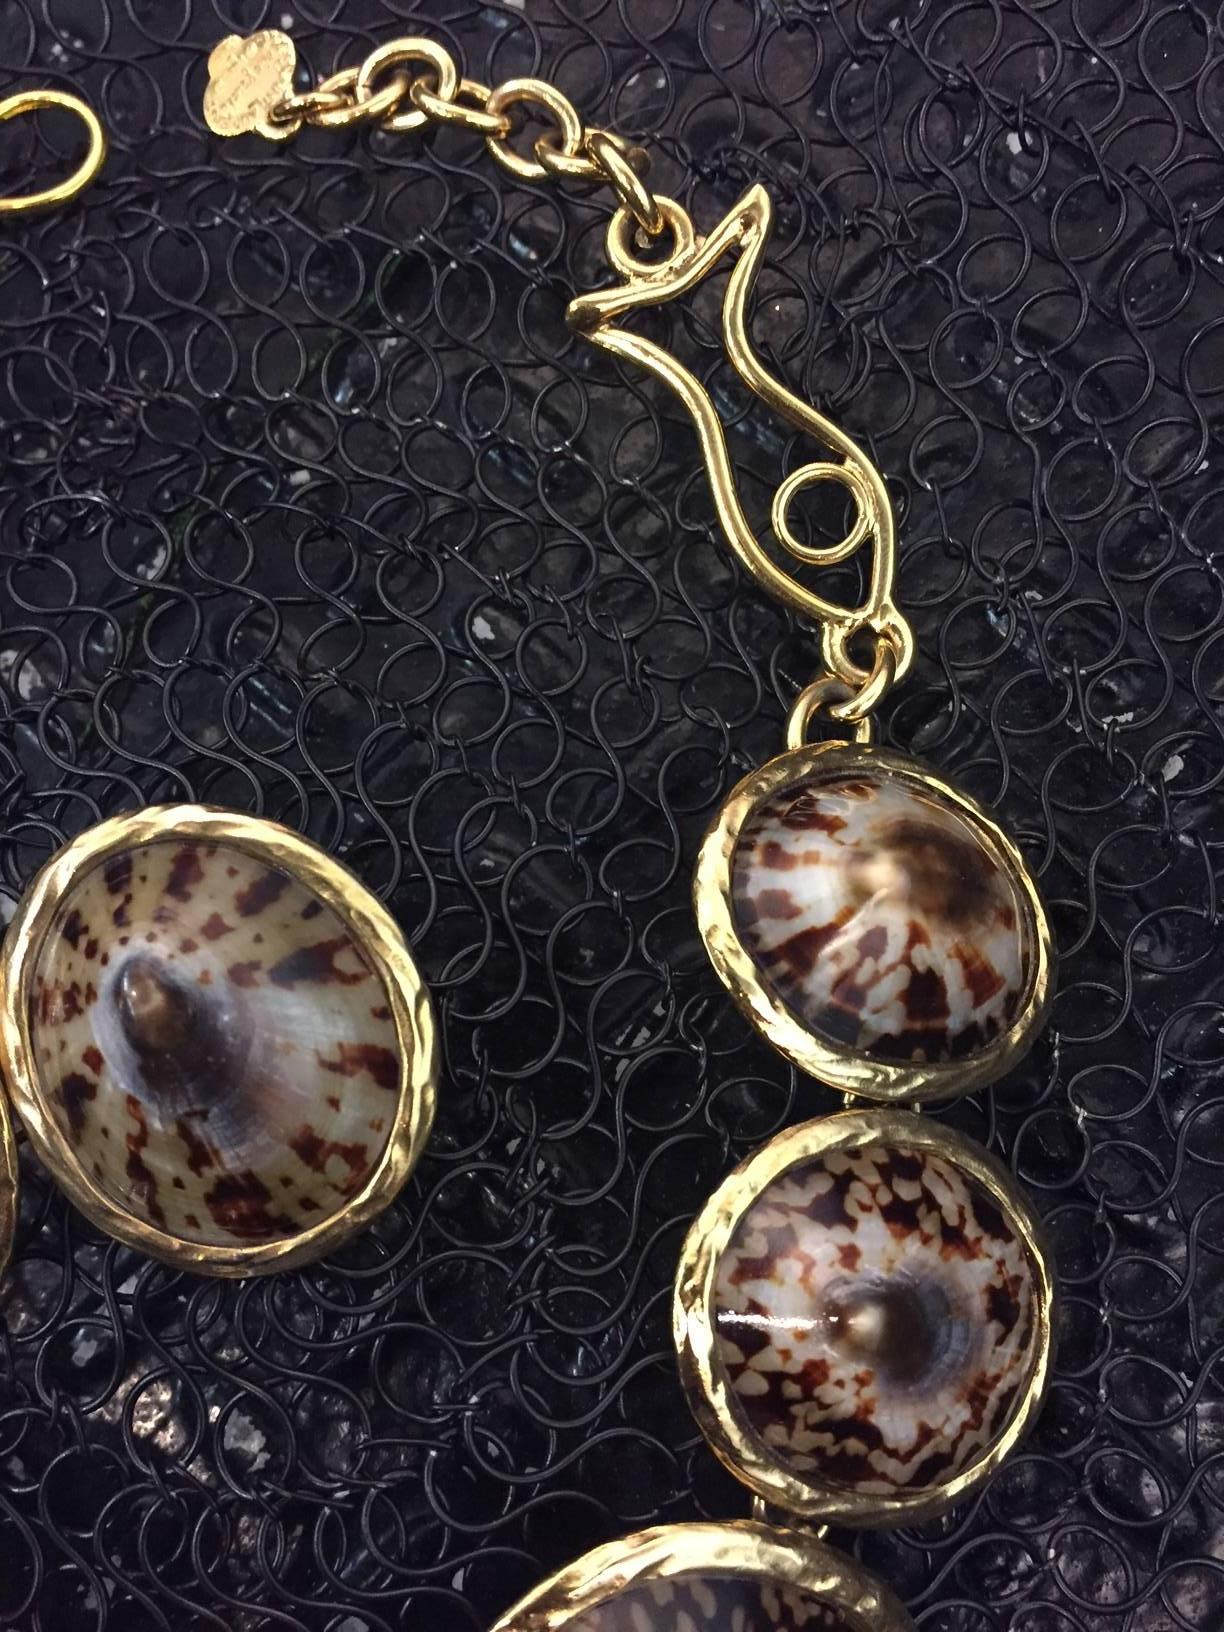 Artisan Yves Saint Laurent Rive Gauche Leopard Mollusk Shell Necklace and Earring Set For Sale